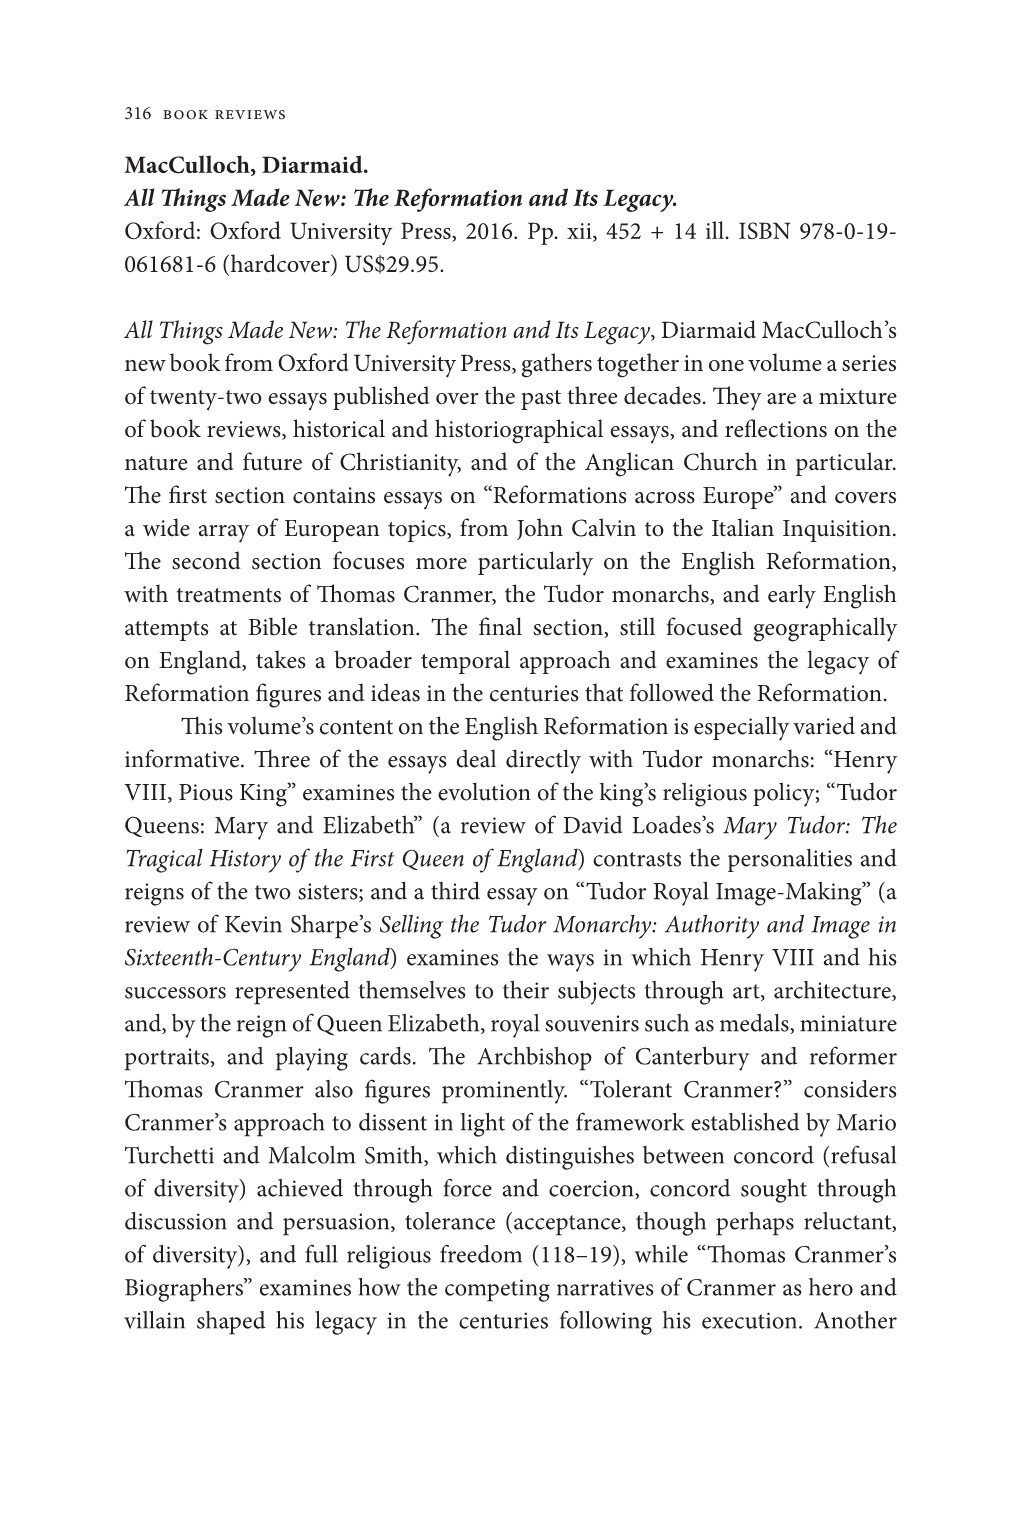 Macculloch, Diarmaid. All Things Made New: the Reformation and Its Legacy. Oxford: Oxford University Press, 2016. Pp. Xii, 452 + 14 Ill